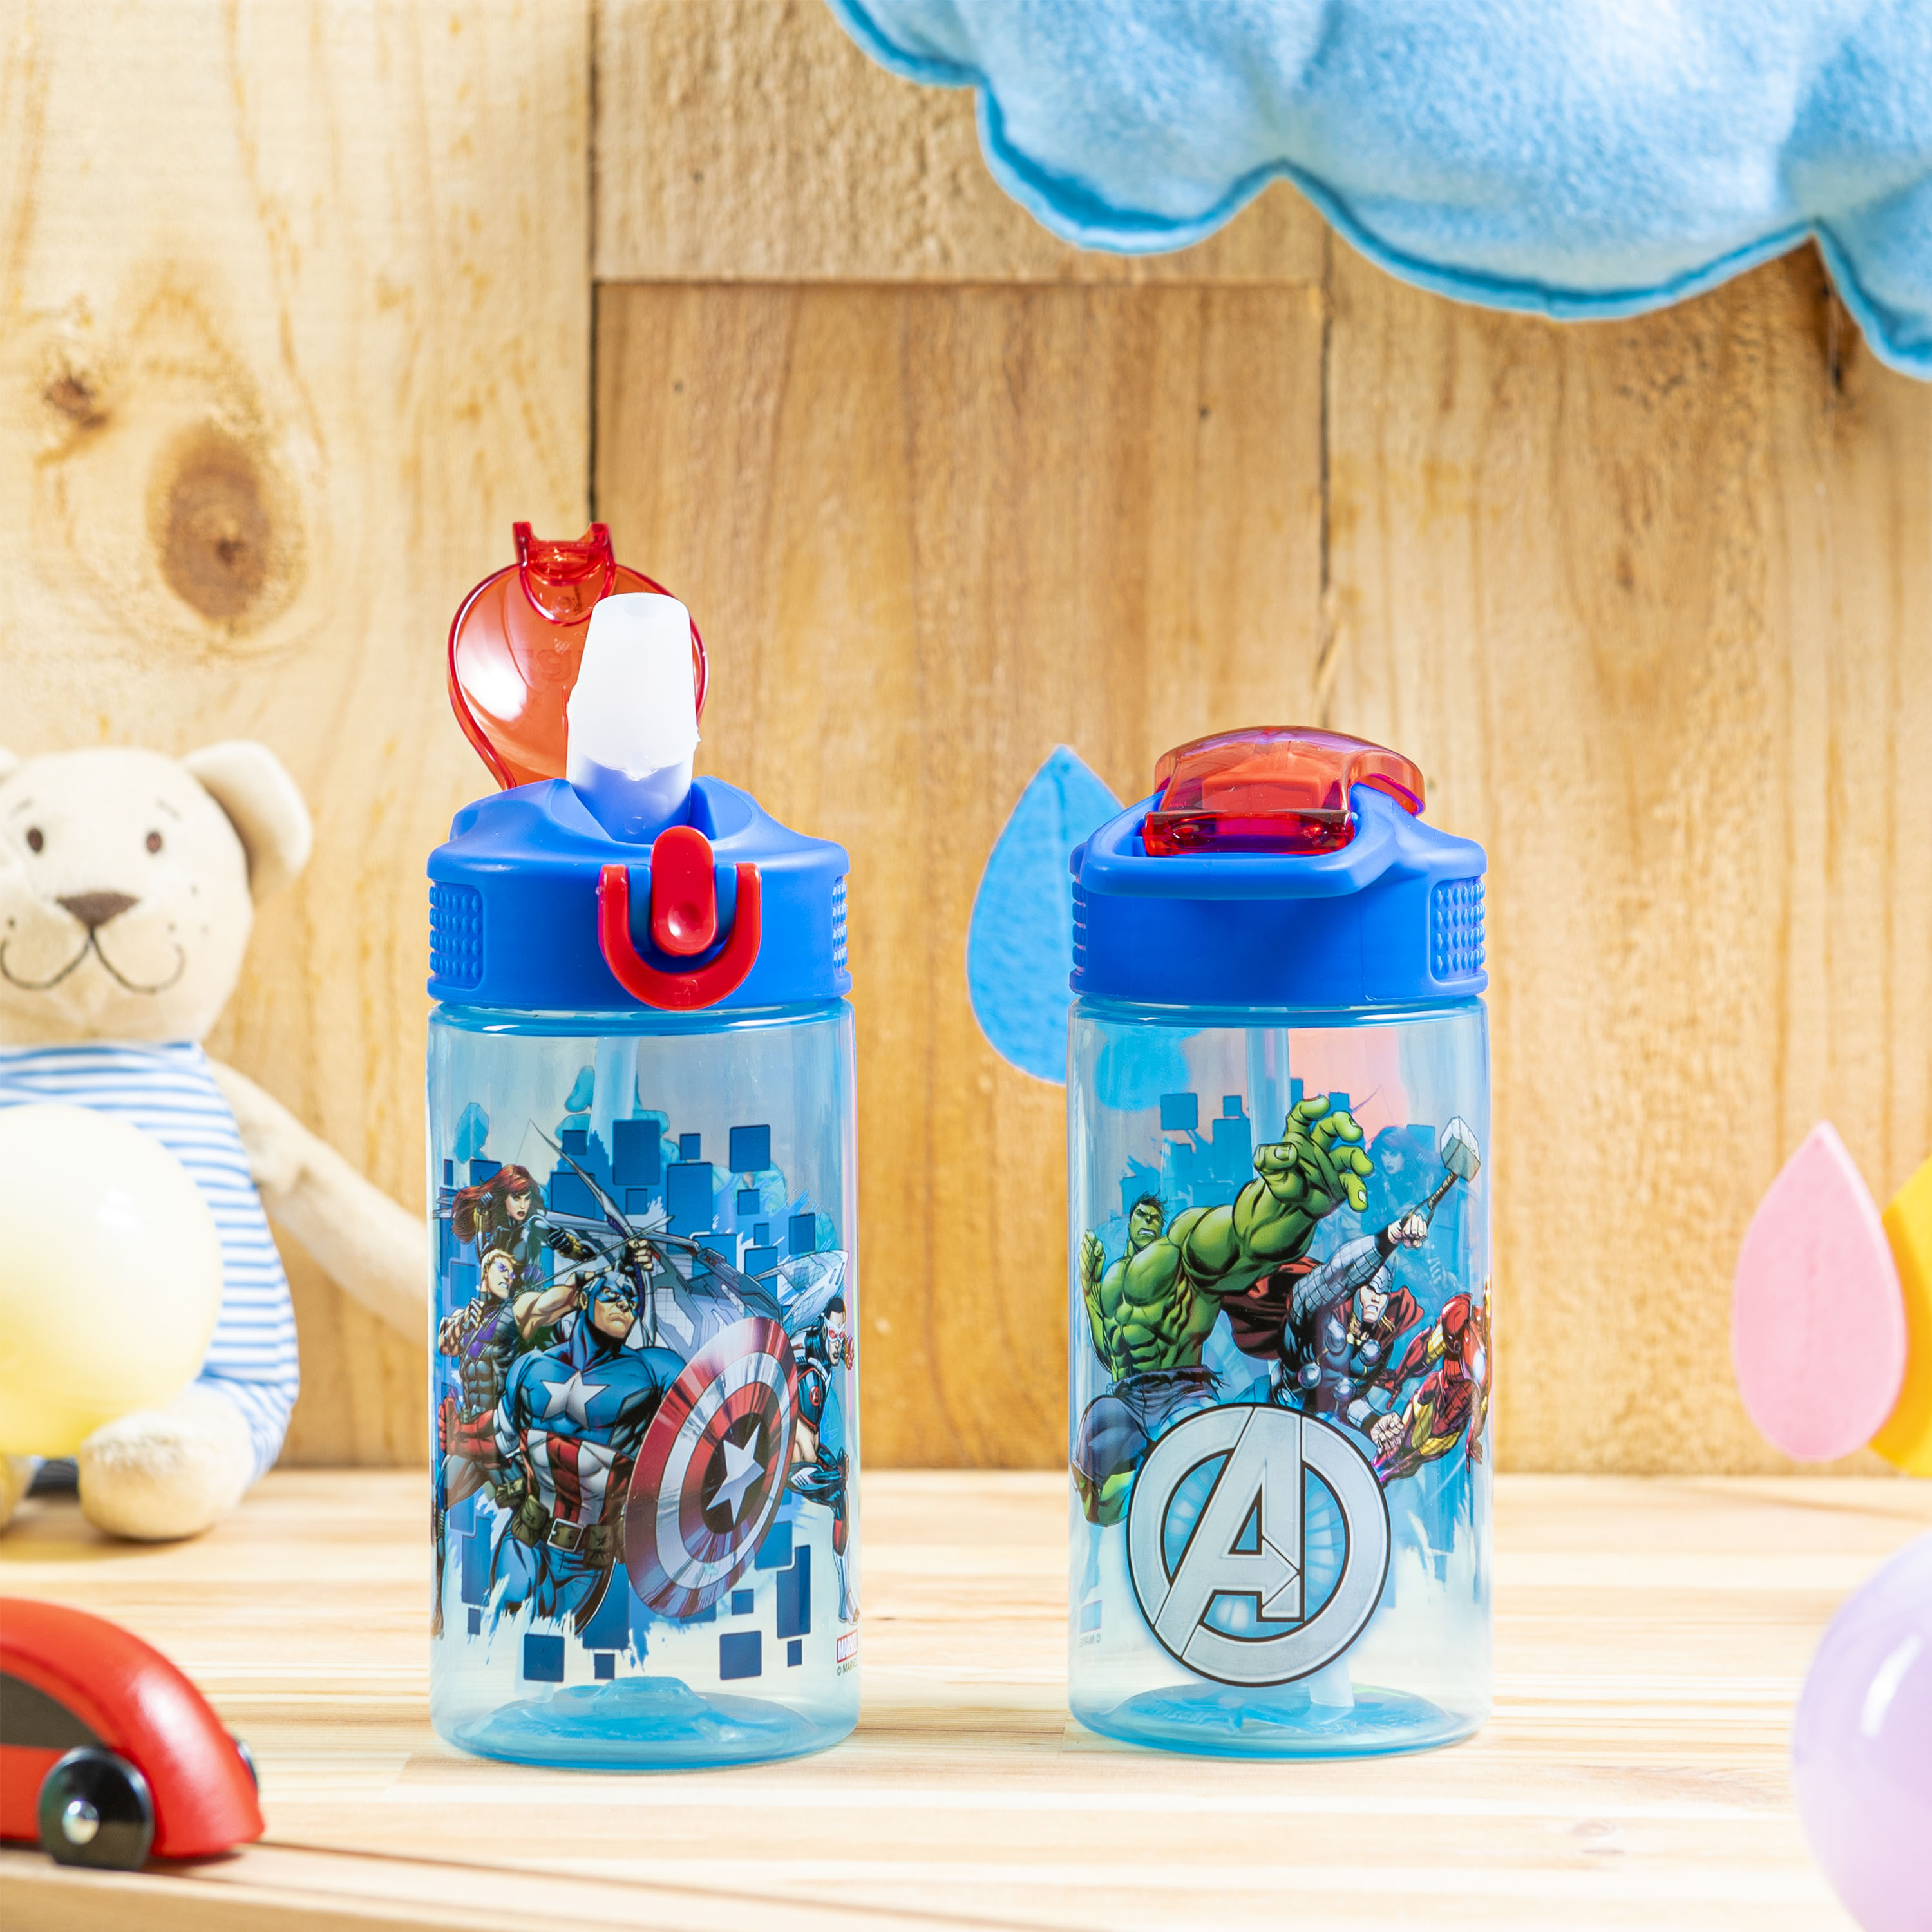 Marvel Comics 16 ounce Reusable Plastic Water Bottle with Straw, The Avengers, 2-piece set slideshow image 4